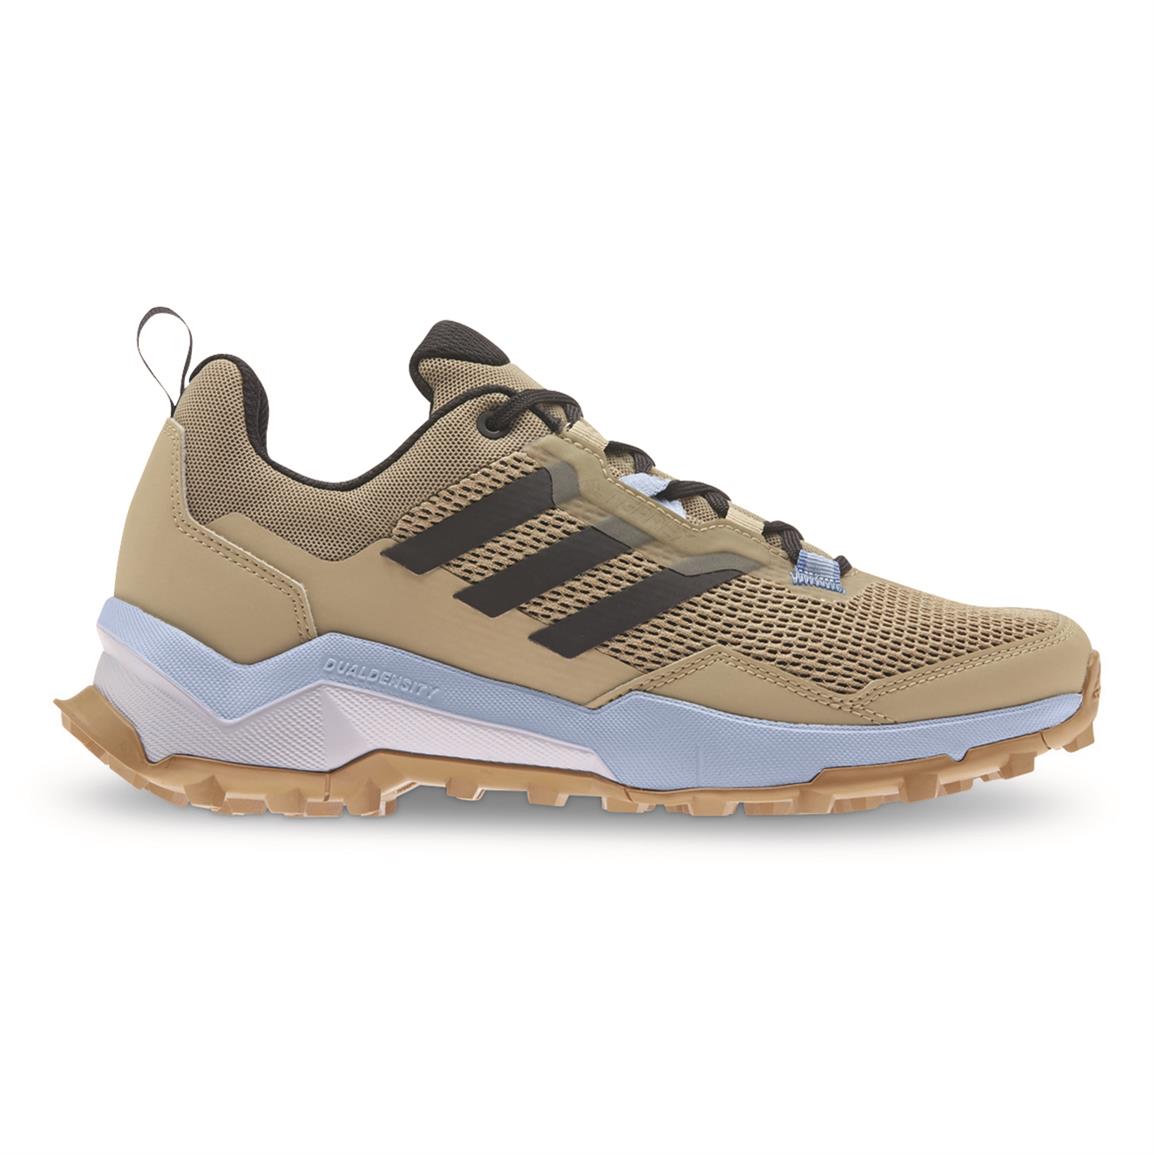 Adidas Women's AX4 Hiking Shoes, Beige Tone/core Black/ambient Sky